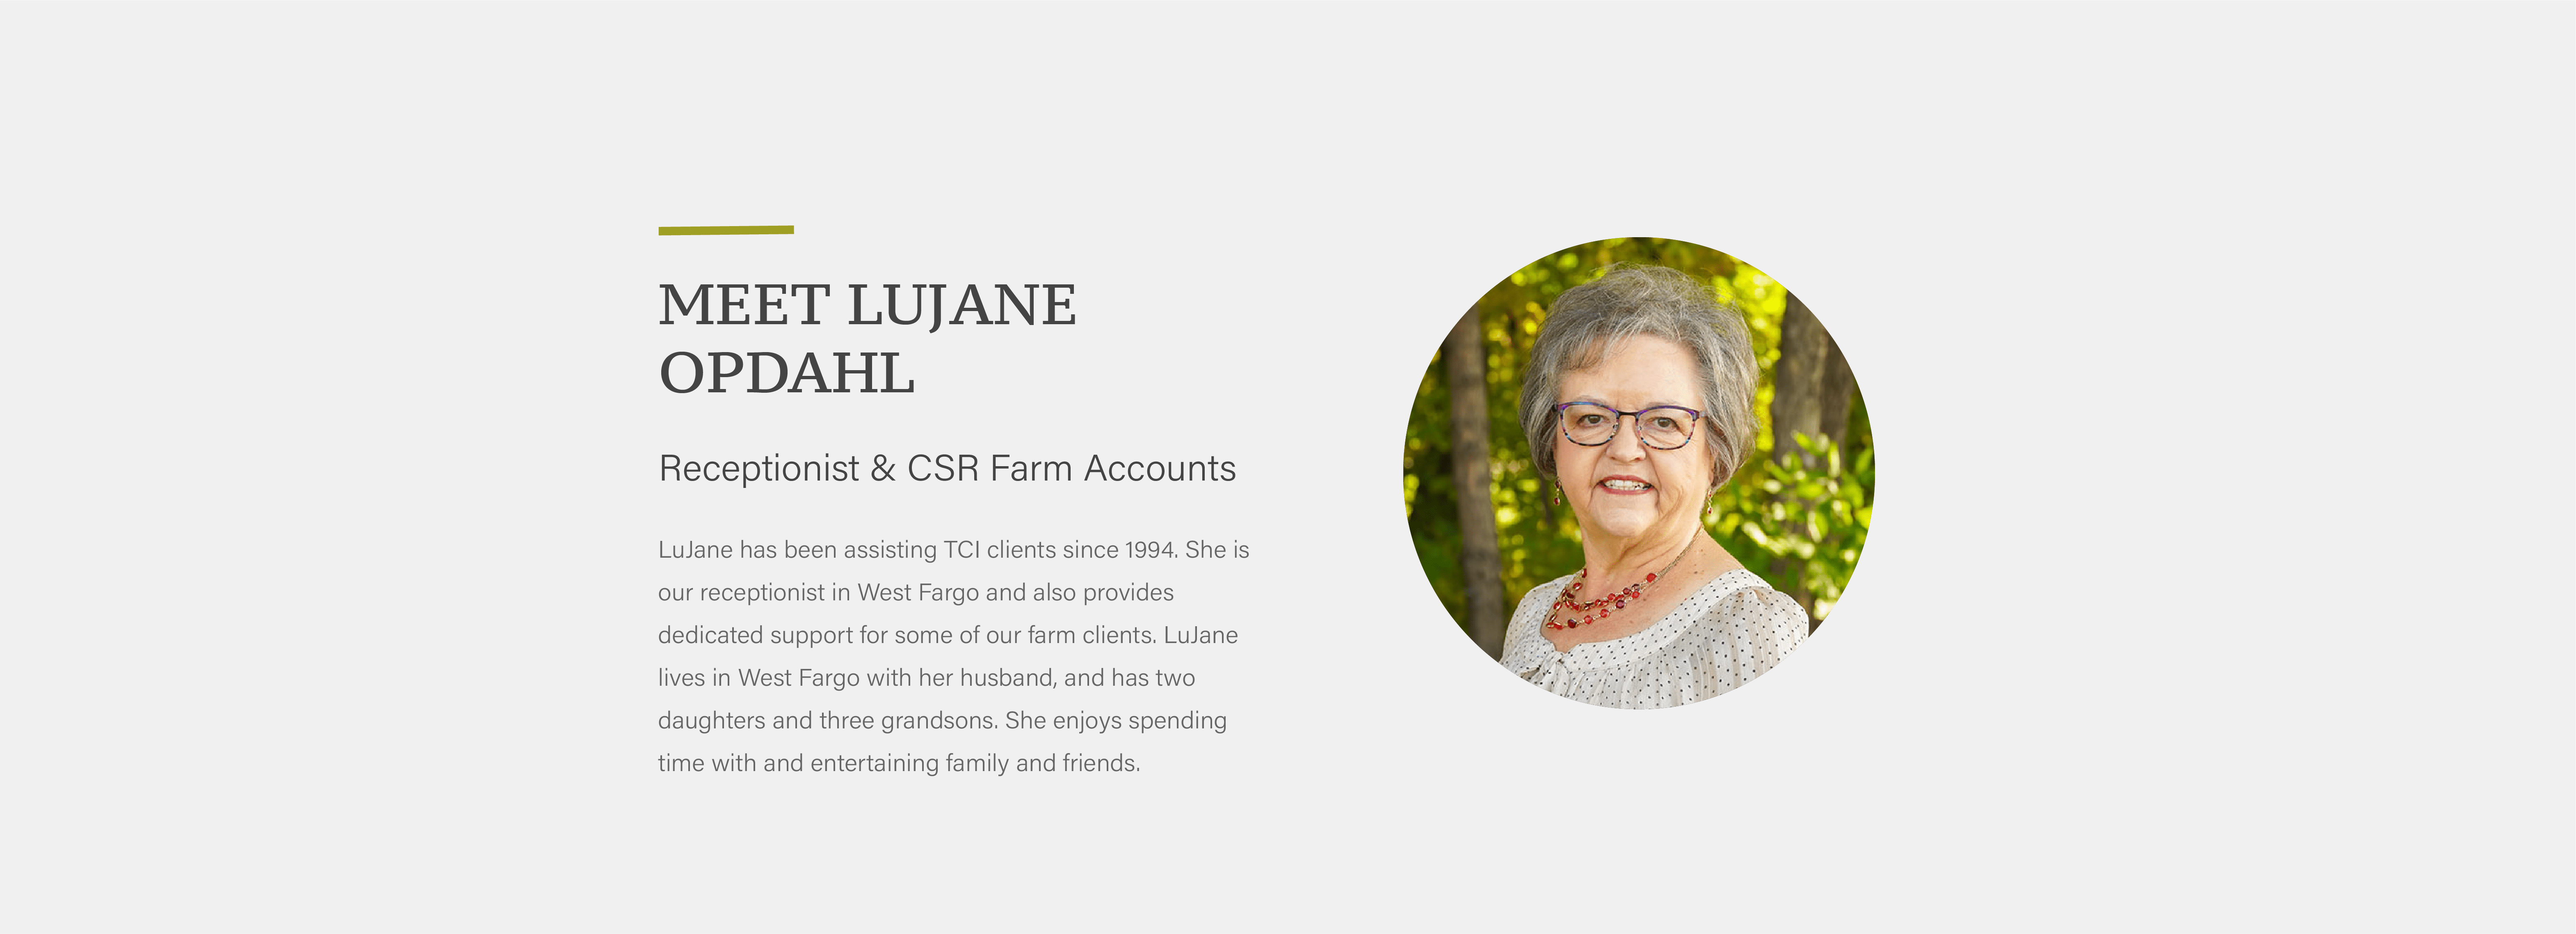 LuJane has been assisting TCI clients since 1994. She is our receptionist in West Fargo and also provides dedicated support for some of our farm clients. LuJane lives in West Fargo with her husband, and has two daughters and three grandsons. She enjoys spending time with and entertaining family and friends.